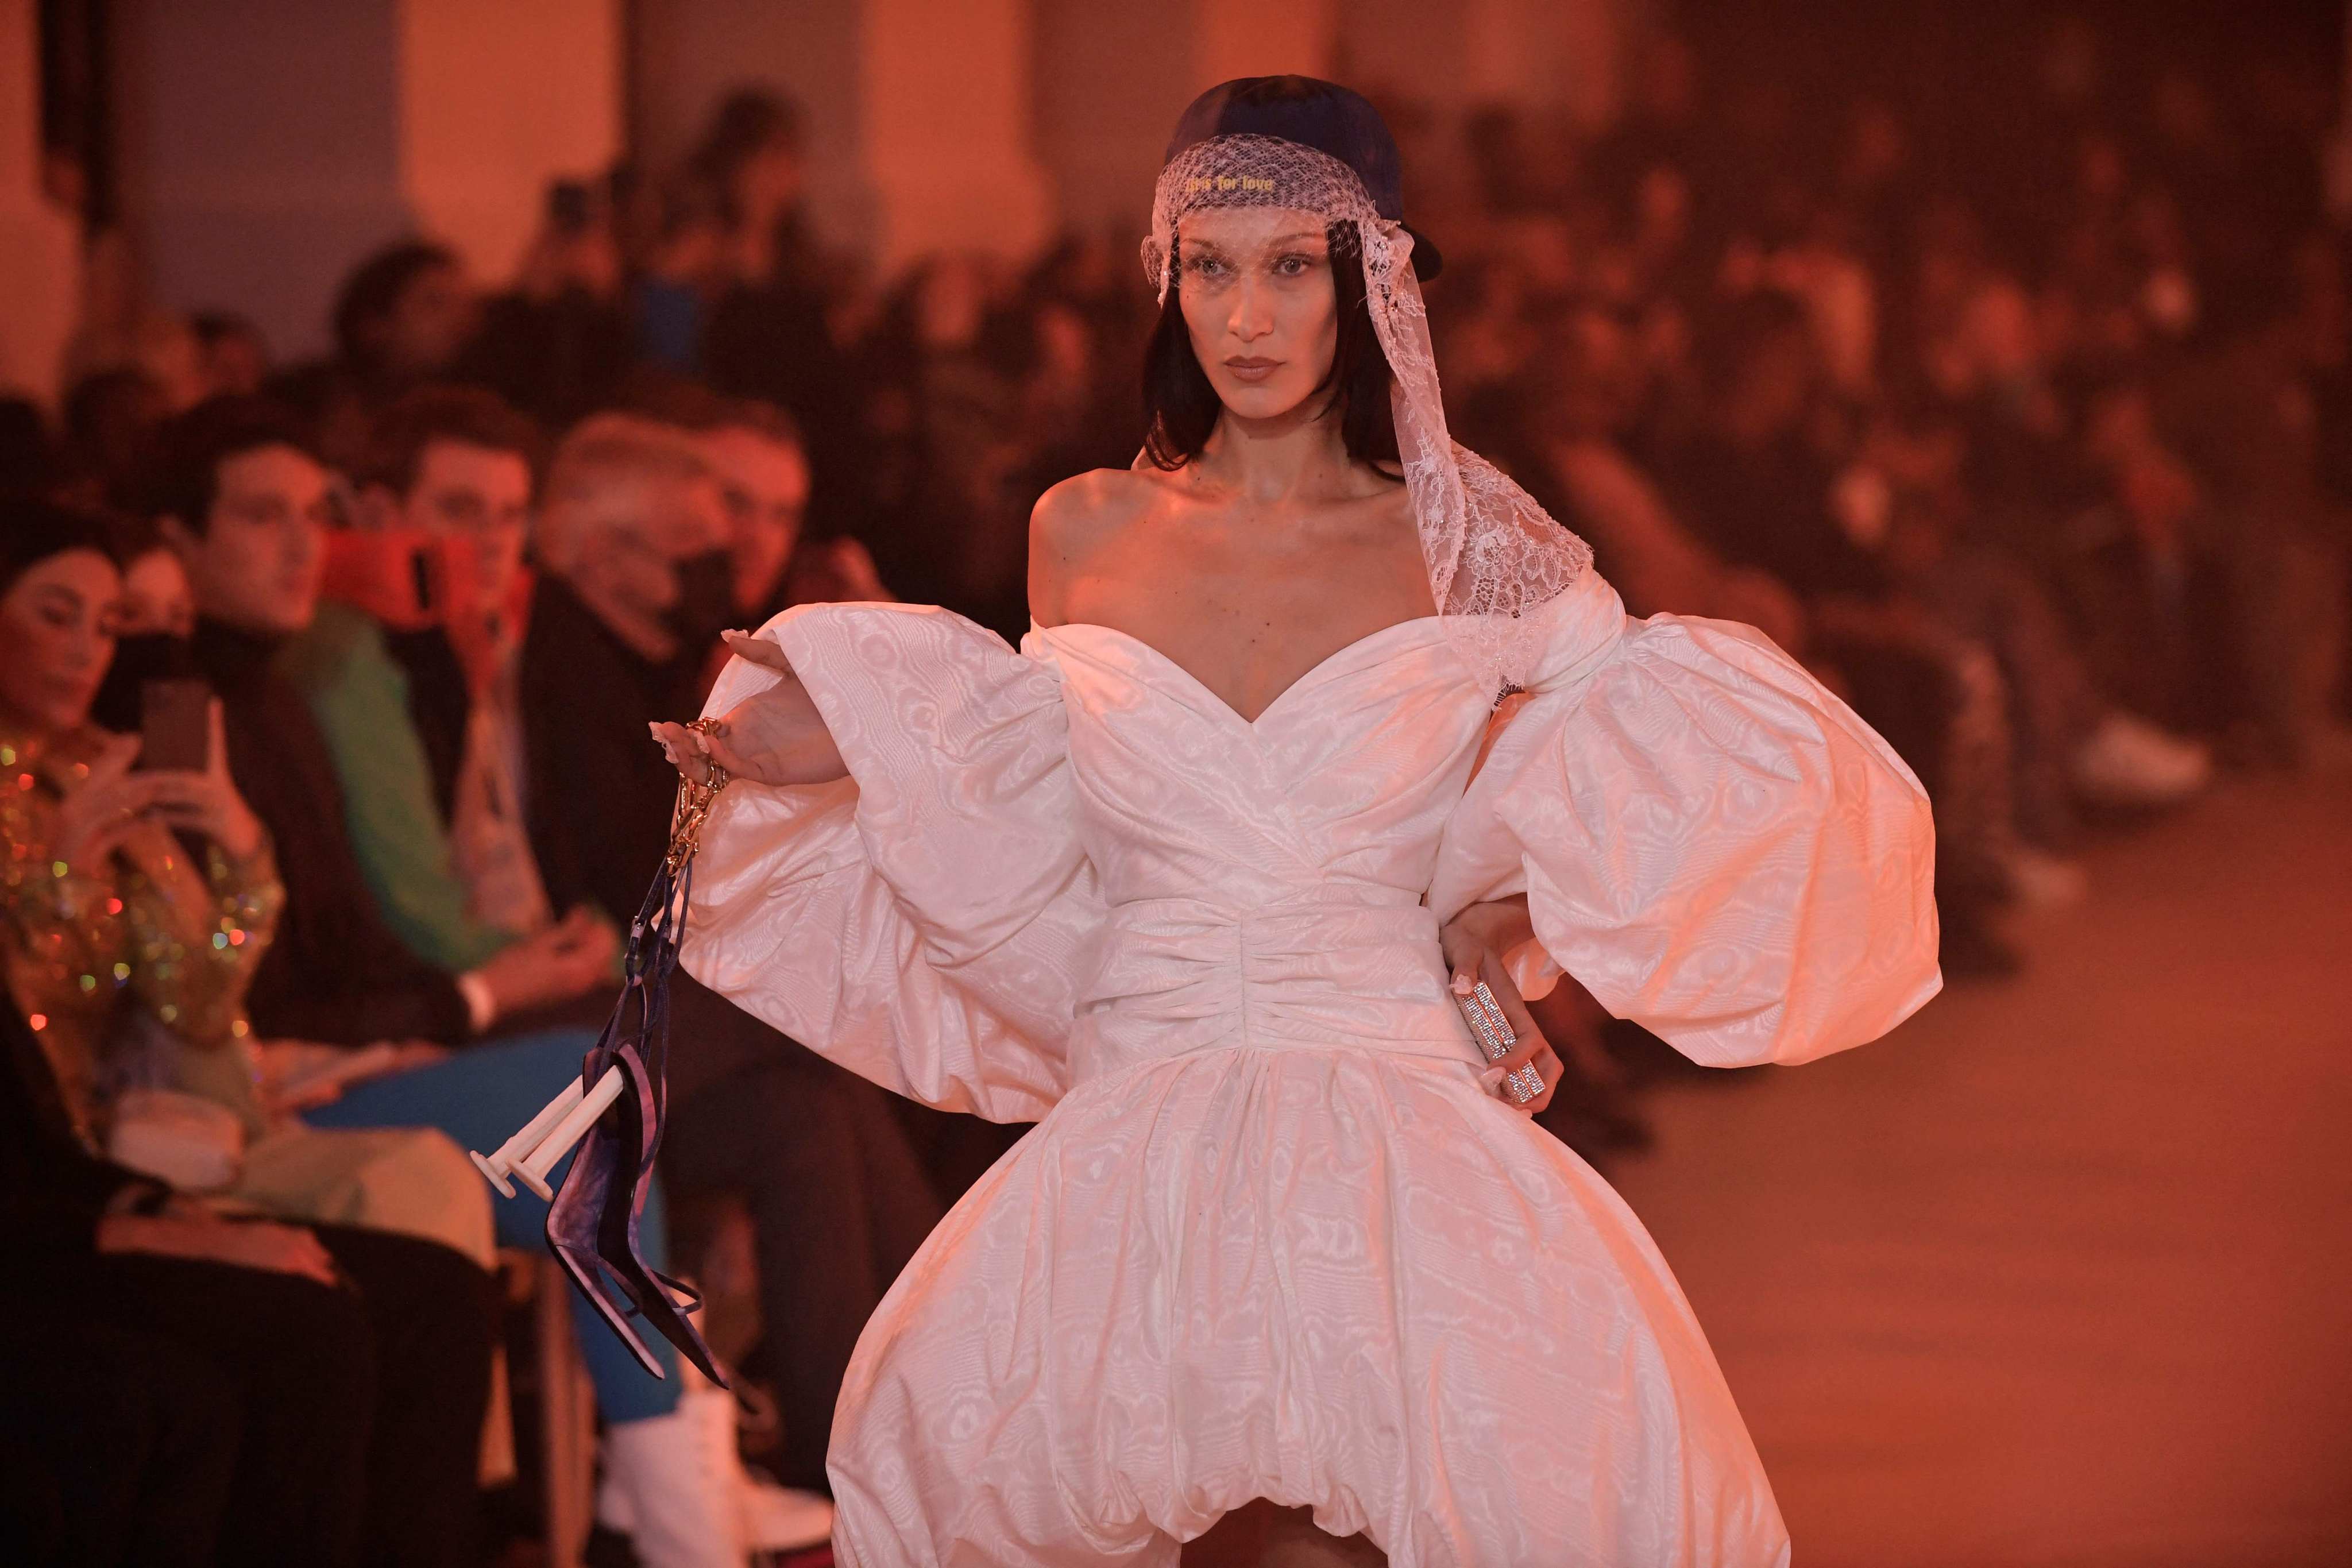 US model Bella Hadid models Virgil Abloh’s final Off-White collection during Paris Fashion Week, with Rihanna and A$AP Rocky in the audience. Photo: AFP